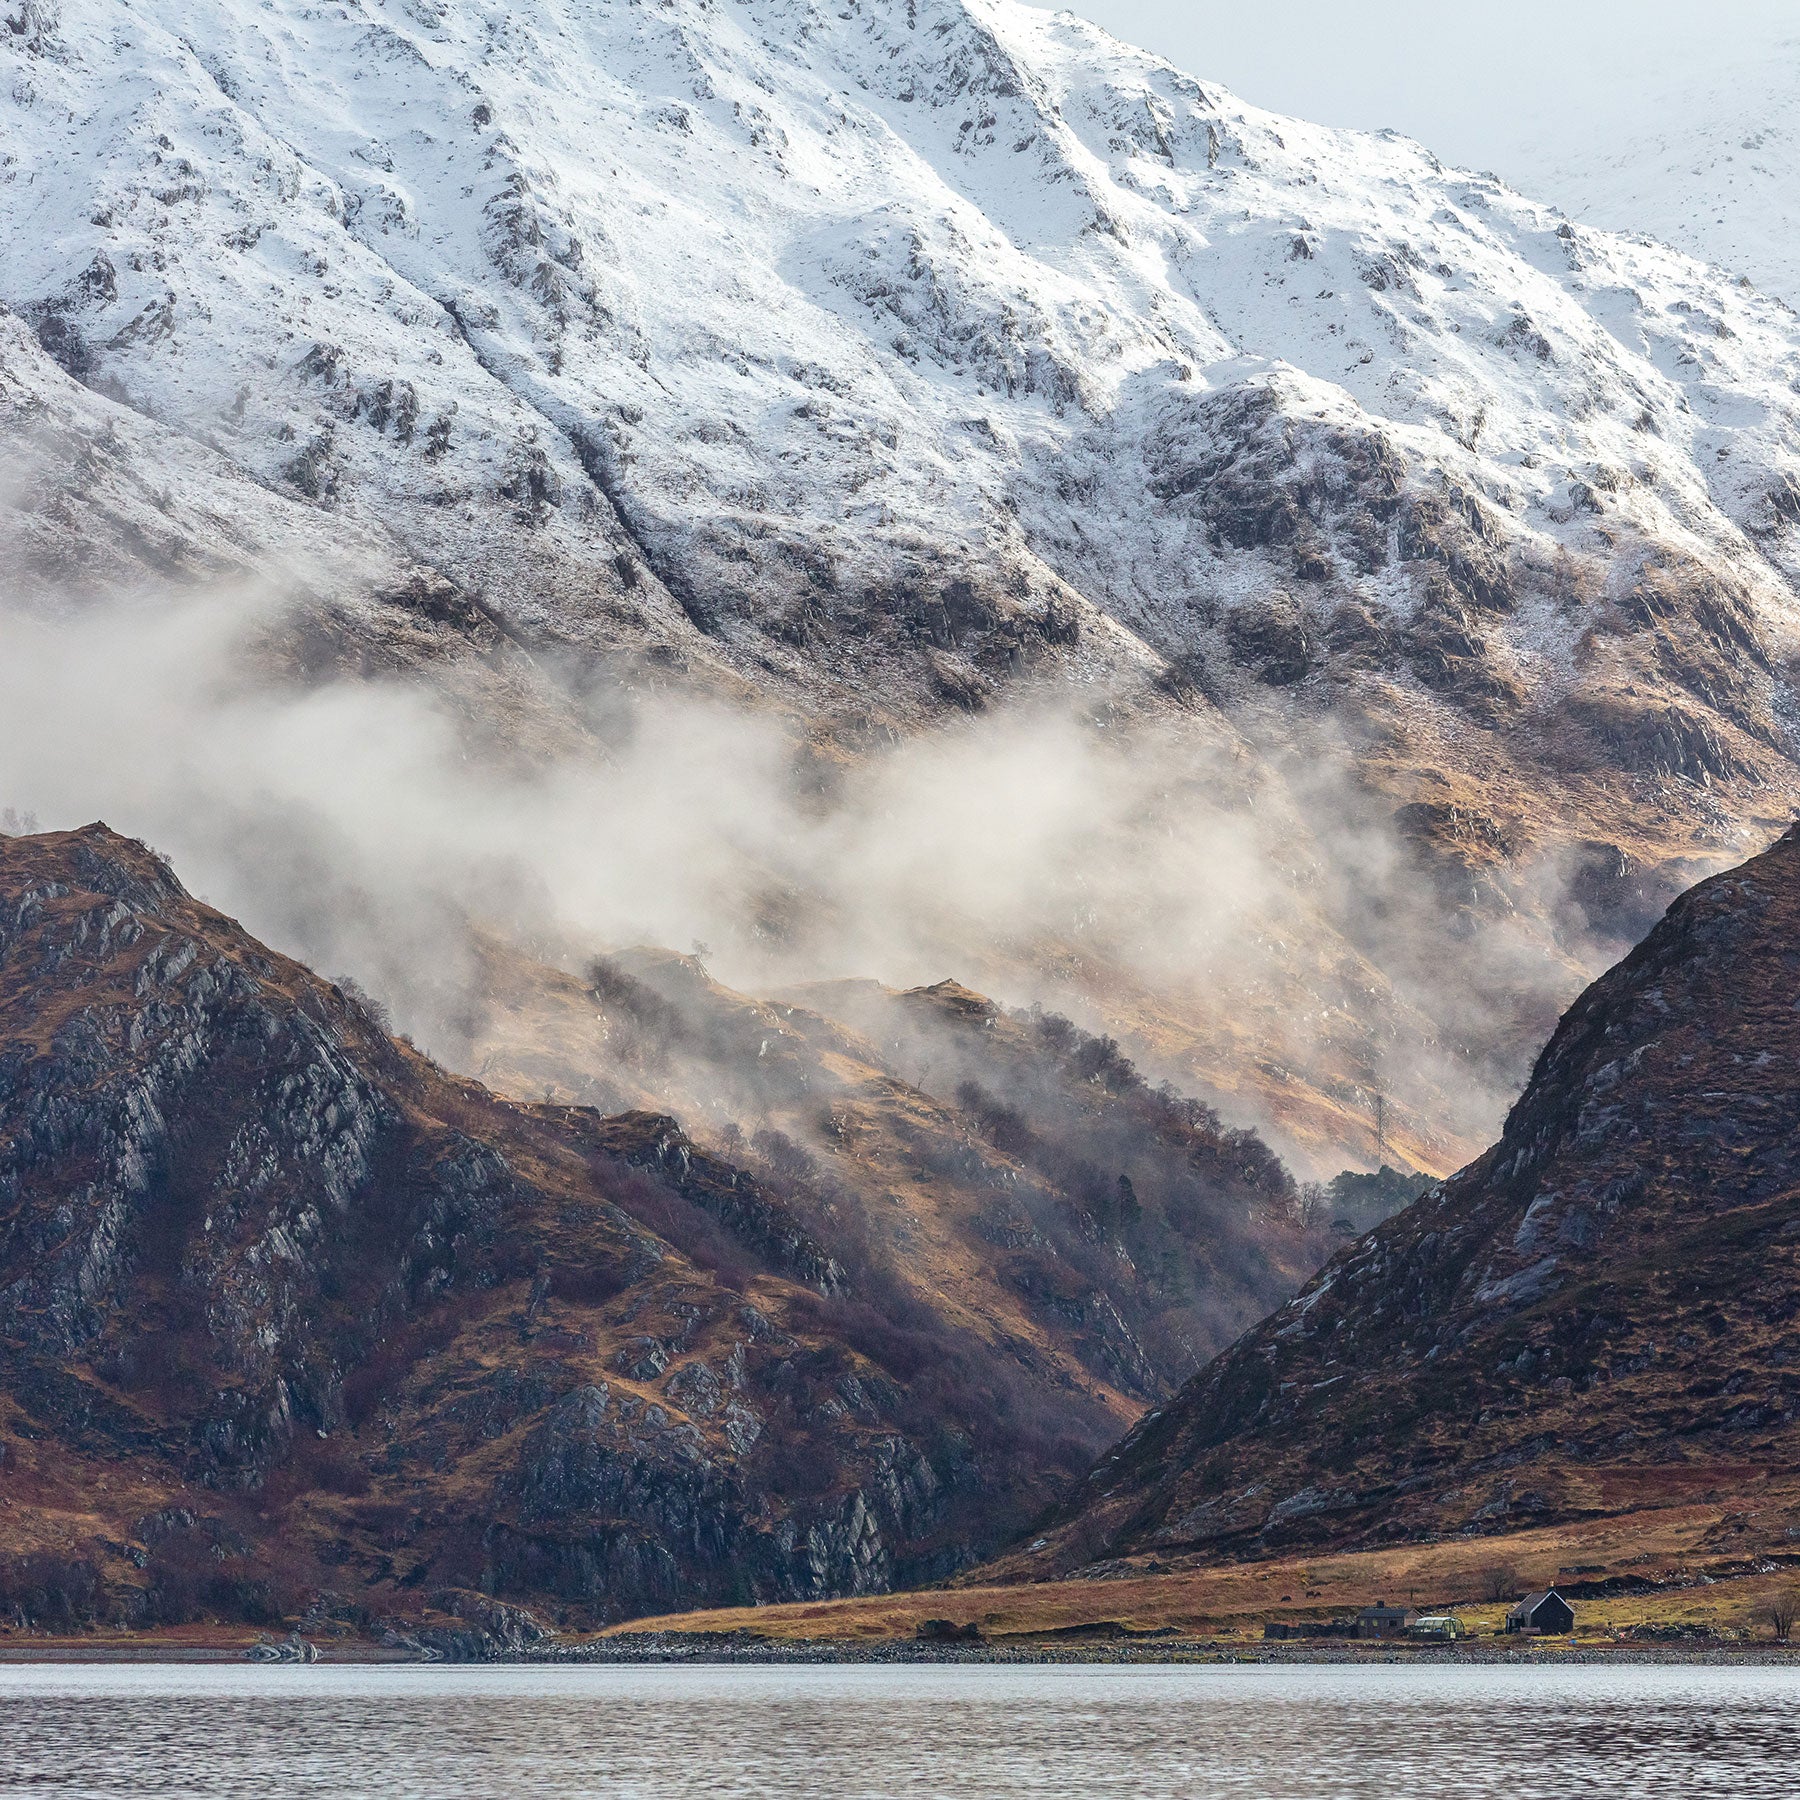 Majestic Scottish landscape with snow-clad mountains above a loch